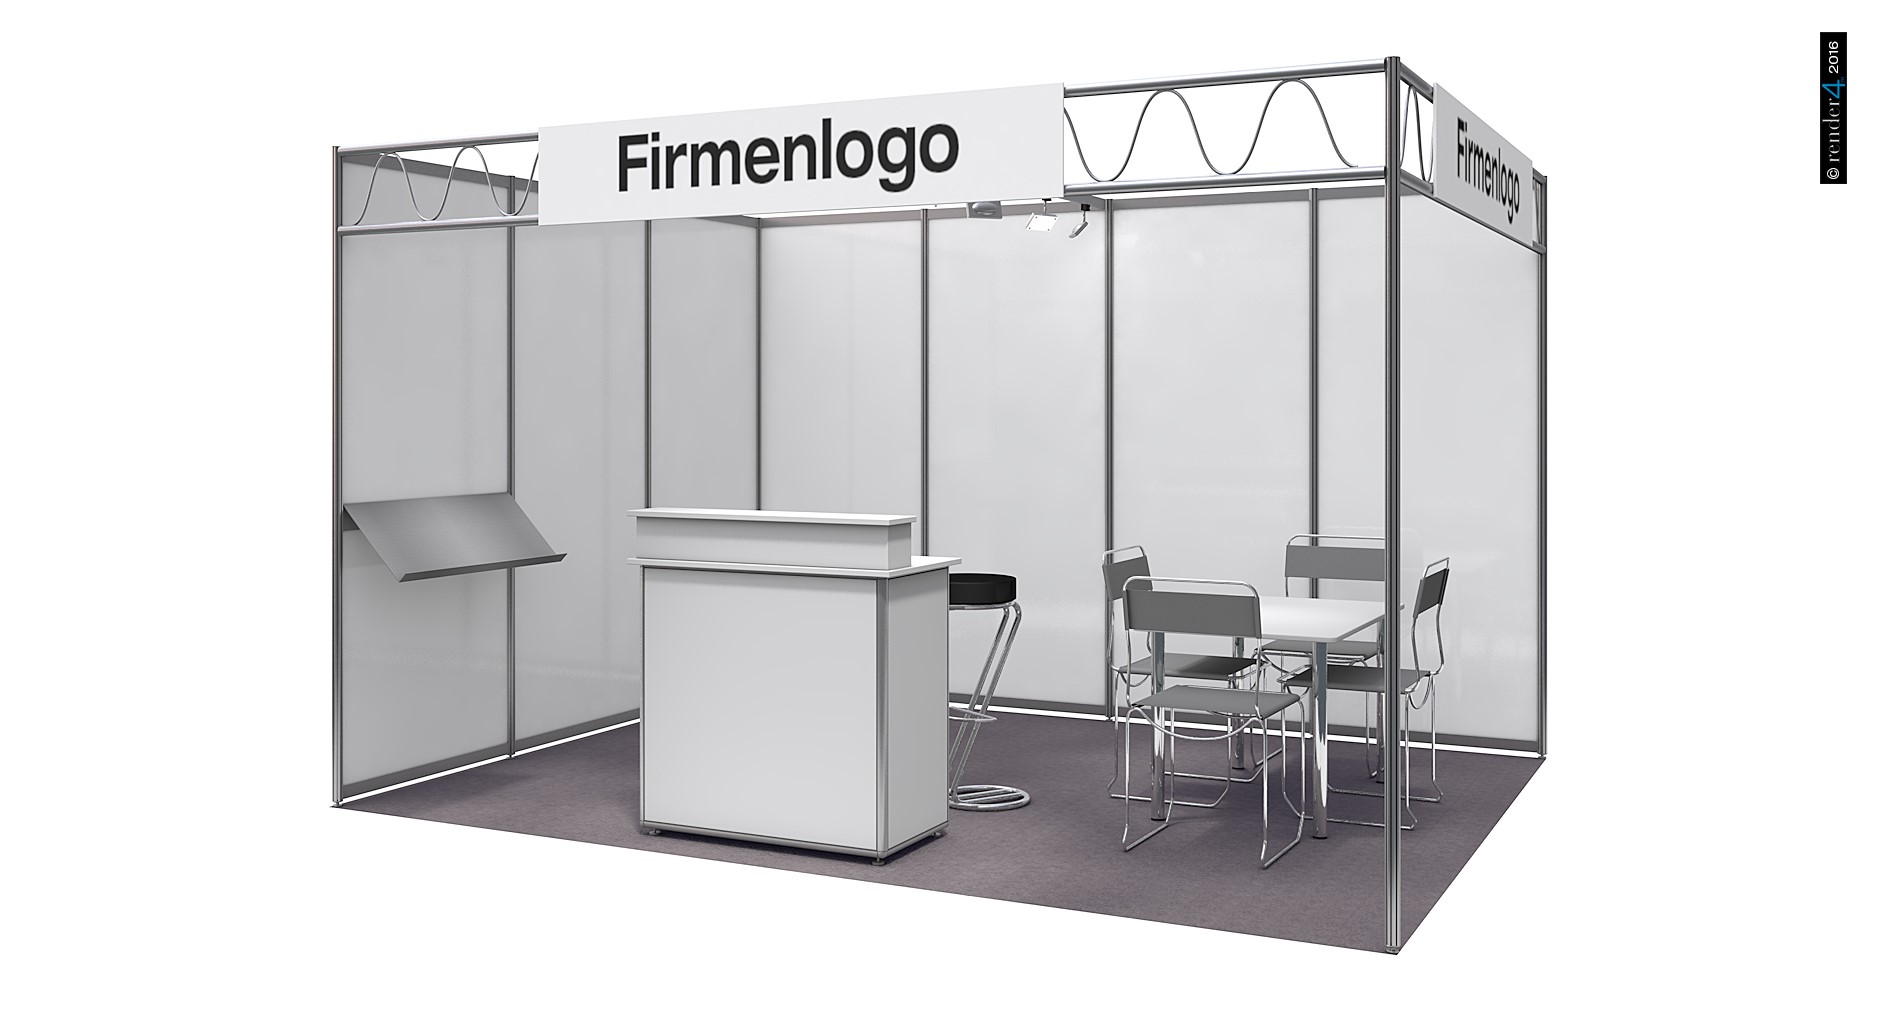 Exhibition booth - Basis booths - Comfort